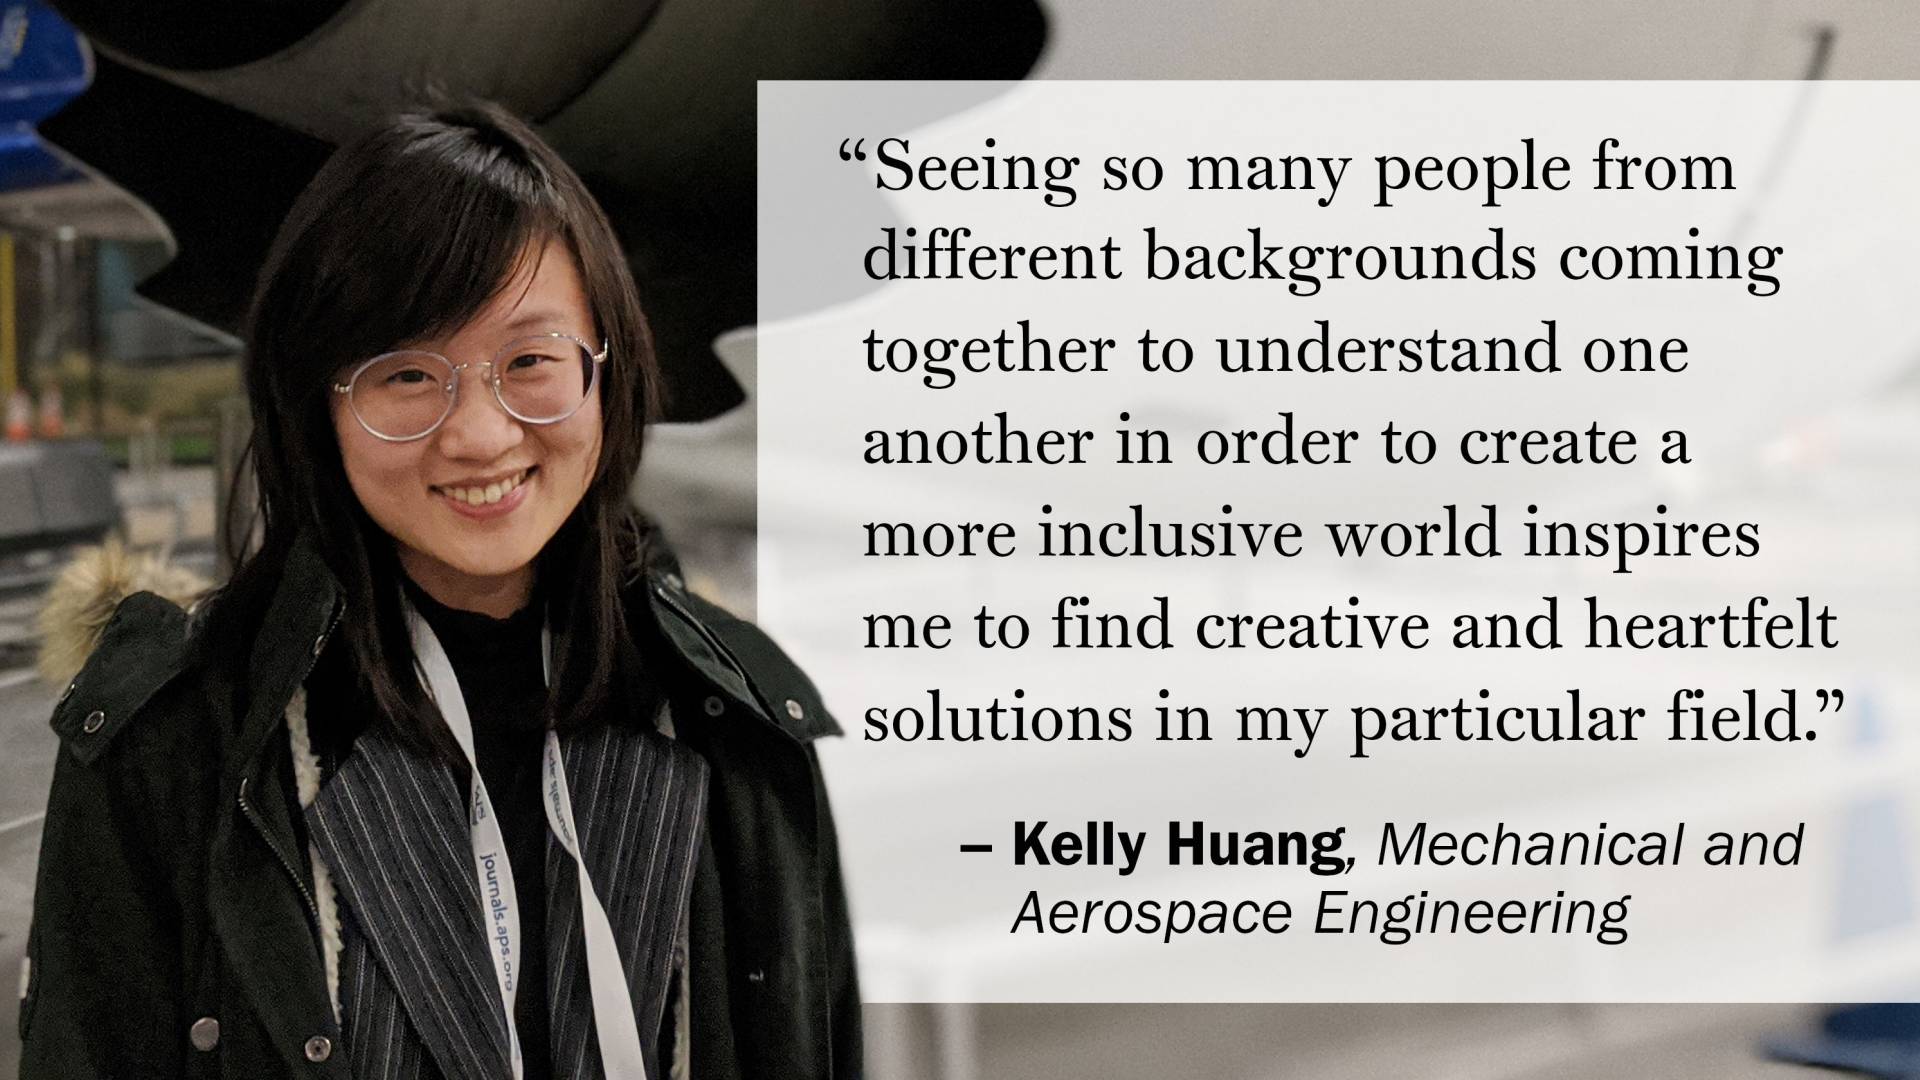 "Seeing so many people from different backgrounds coming together to understand one another in order to create a more inclusive world inspires me to find creative and heartfelt solutions in my particular field."  —Kelly Huang, Mechanical and Aerospace Engineering